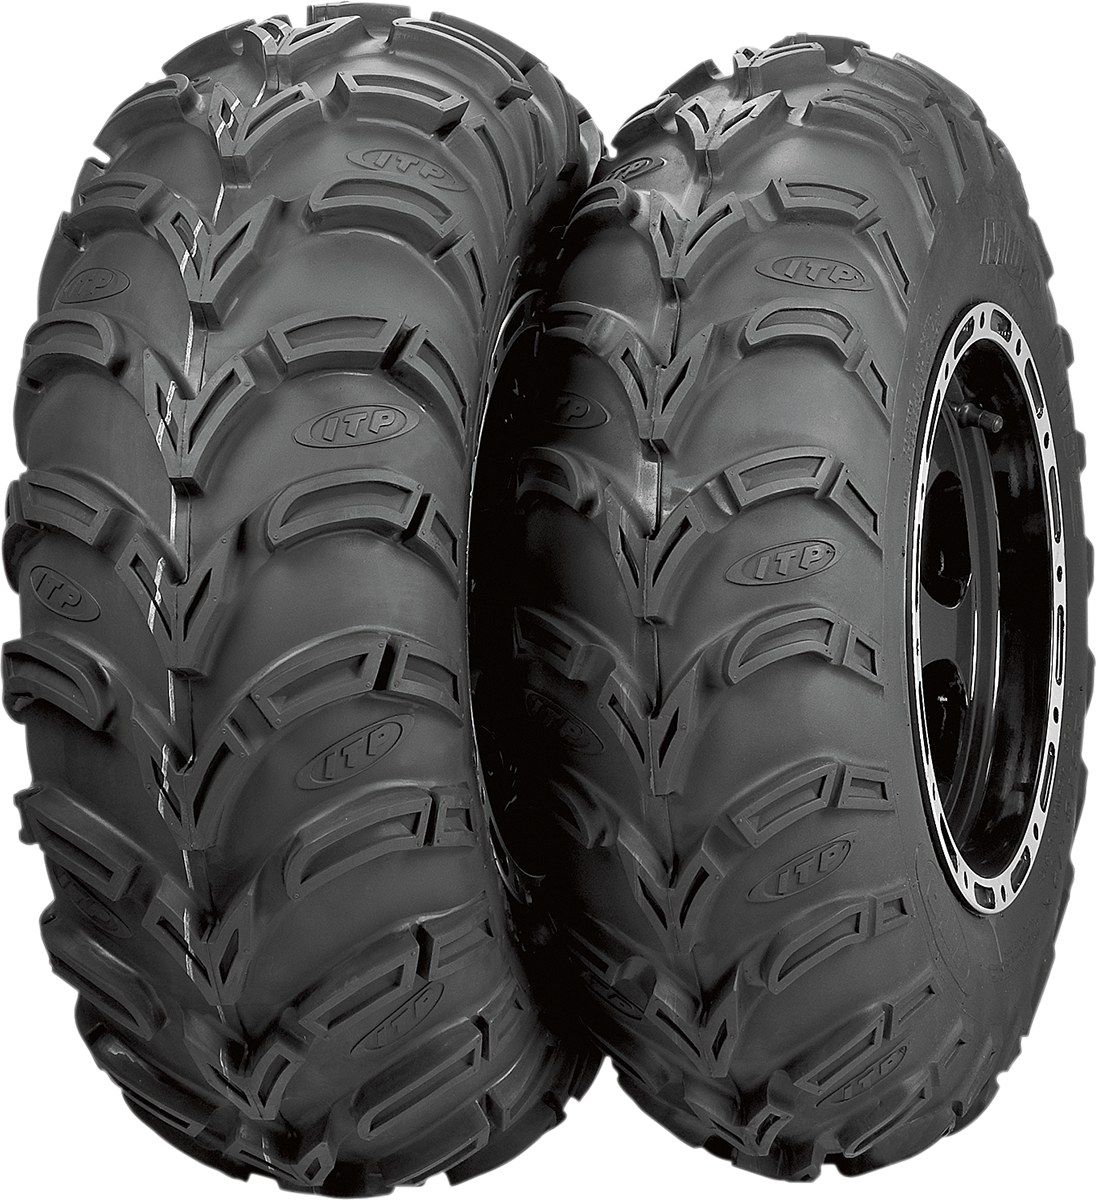 ITP Tire - Mud Lite XL - Front/Rear - 27x9-12 - 6 Ply 56A380